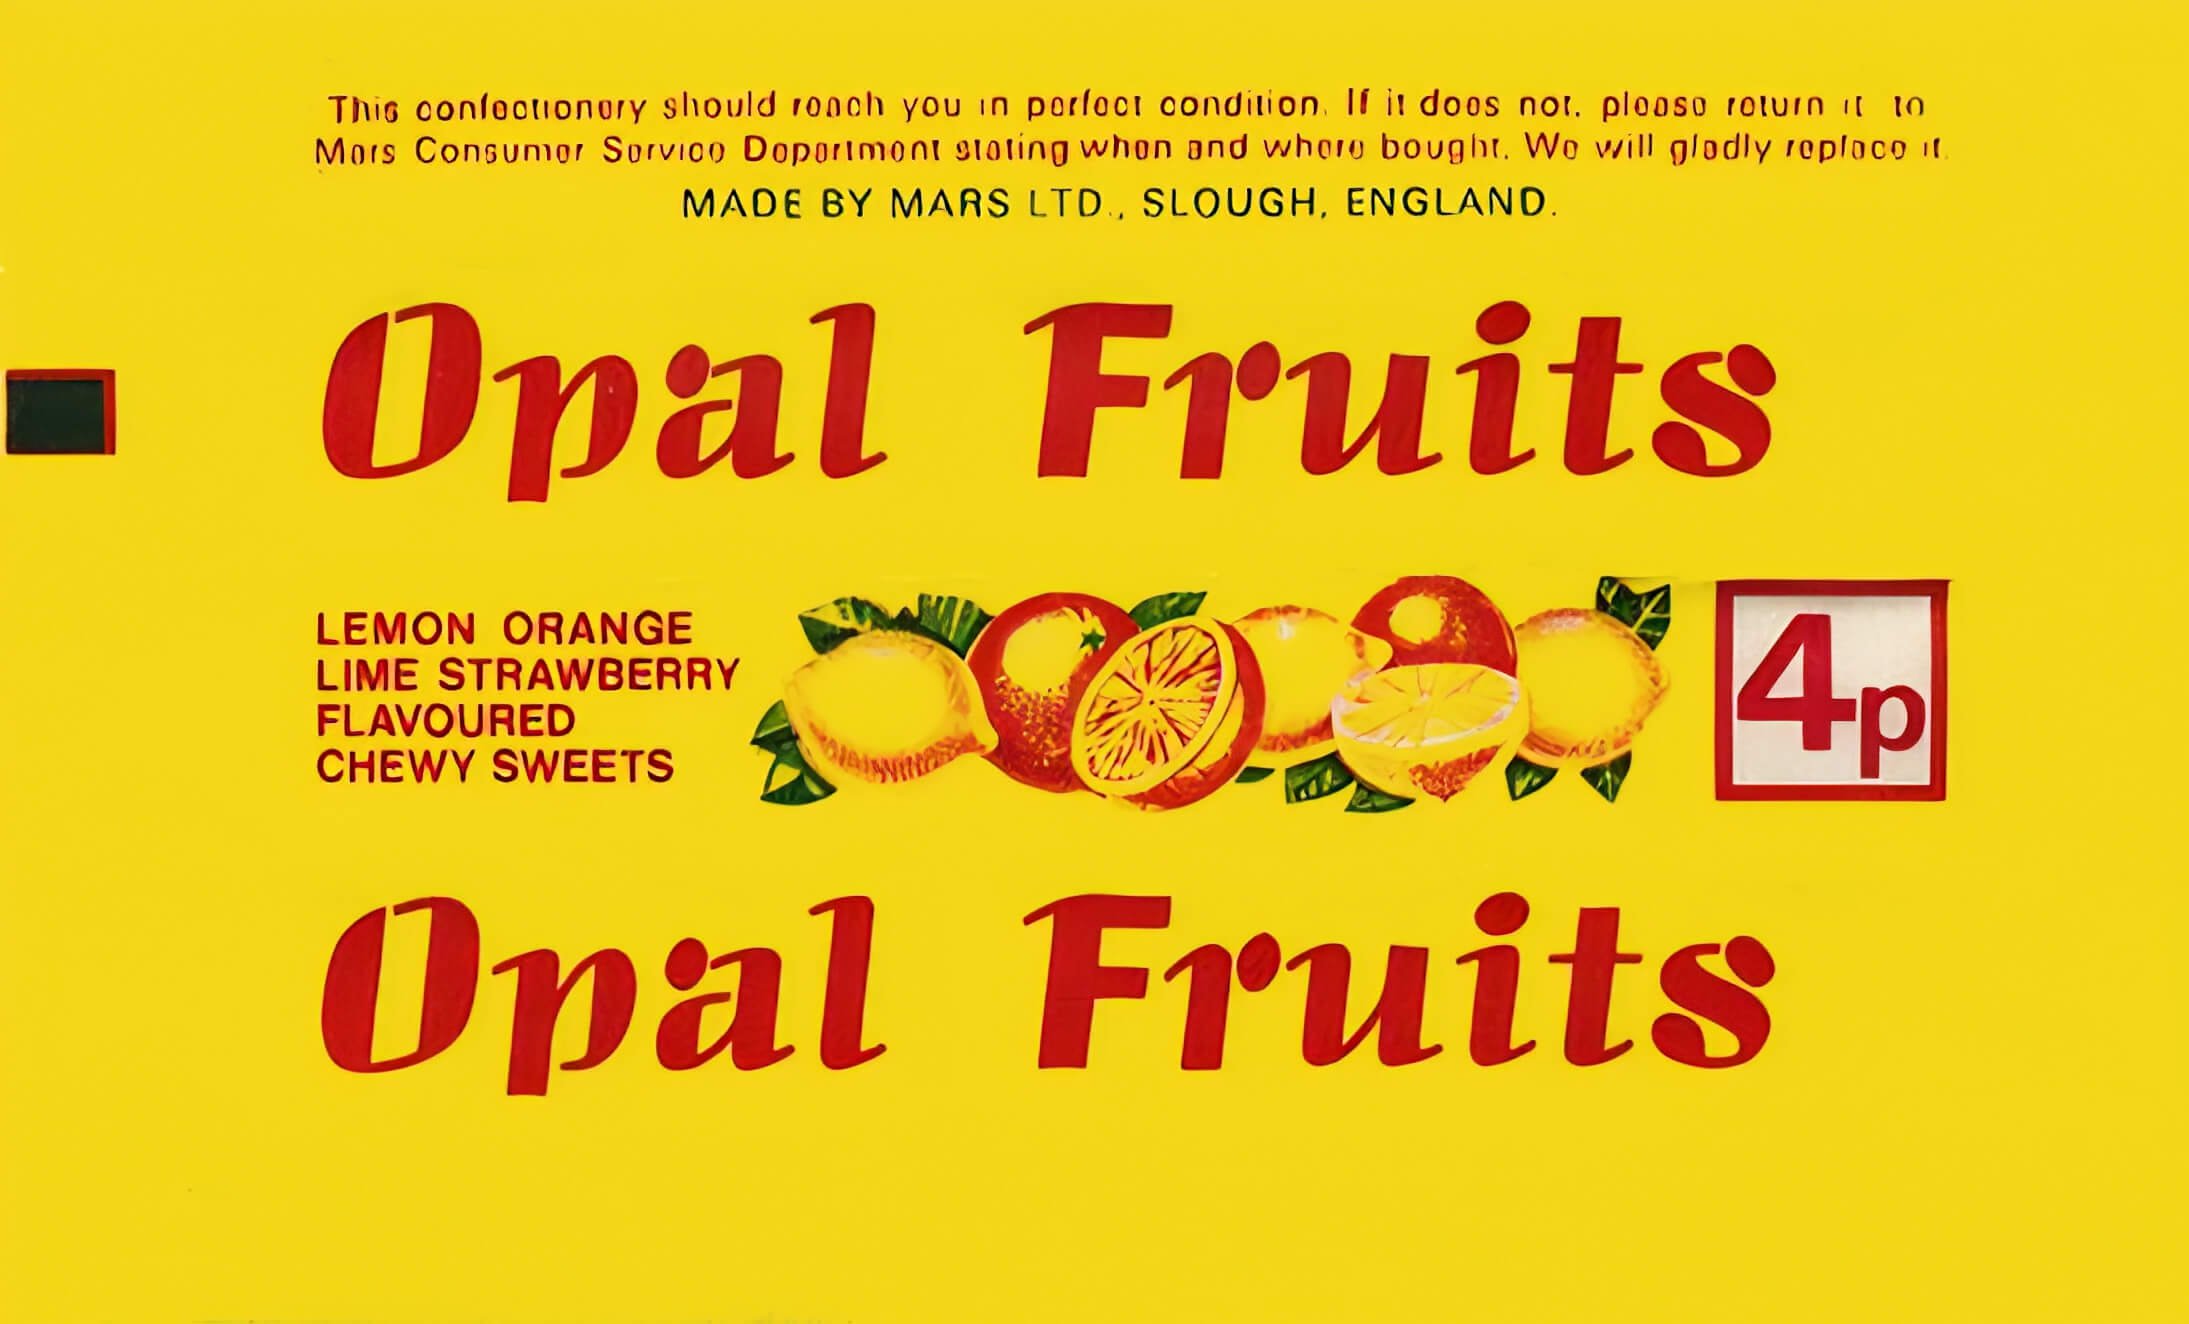 Opal Fruits wrapper from the 1960s. Bright yellow with red text and illustration of fruit. Price 4p